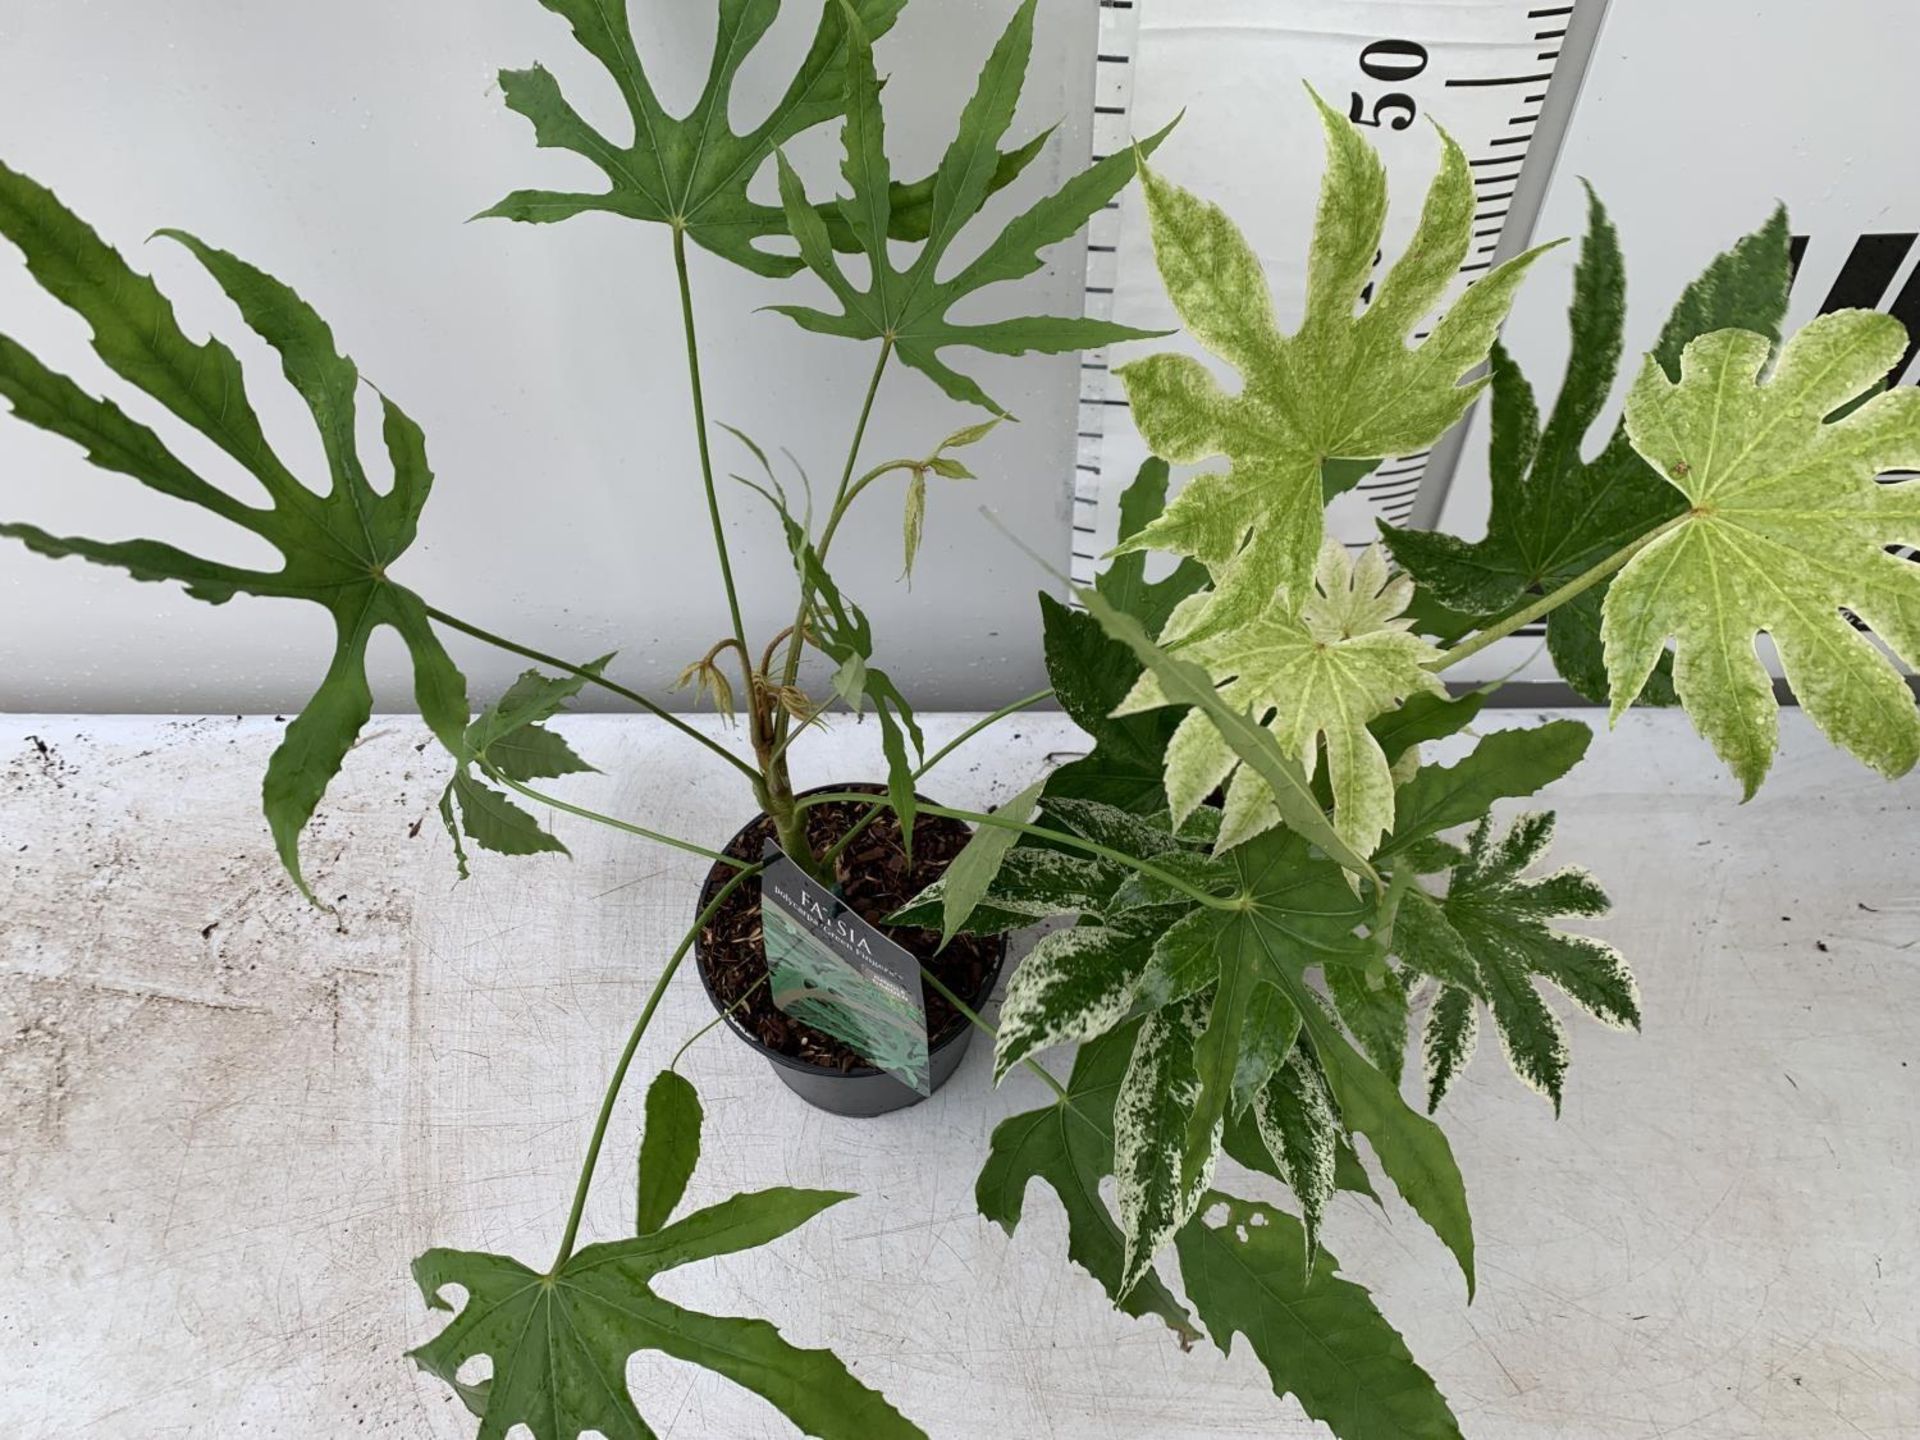 TWO FATSIA JAPONICA 'SPIDERS WEB' AND FATSIA POLYCARPA 'GREEN FINGERS' IN 2 LTR POTS 60CM TALL - Image 2 of 7